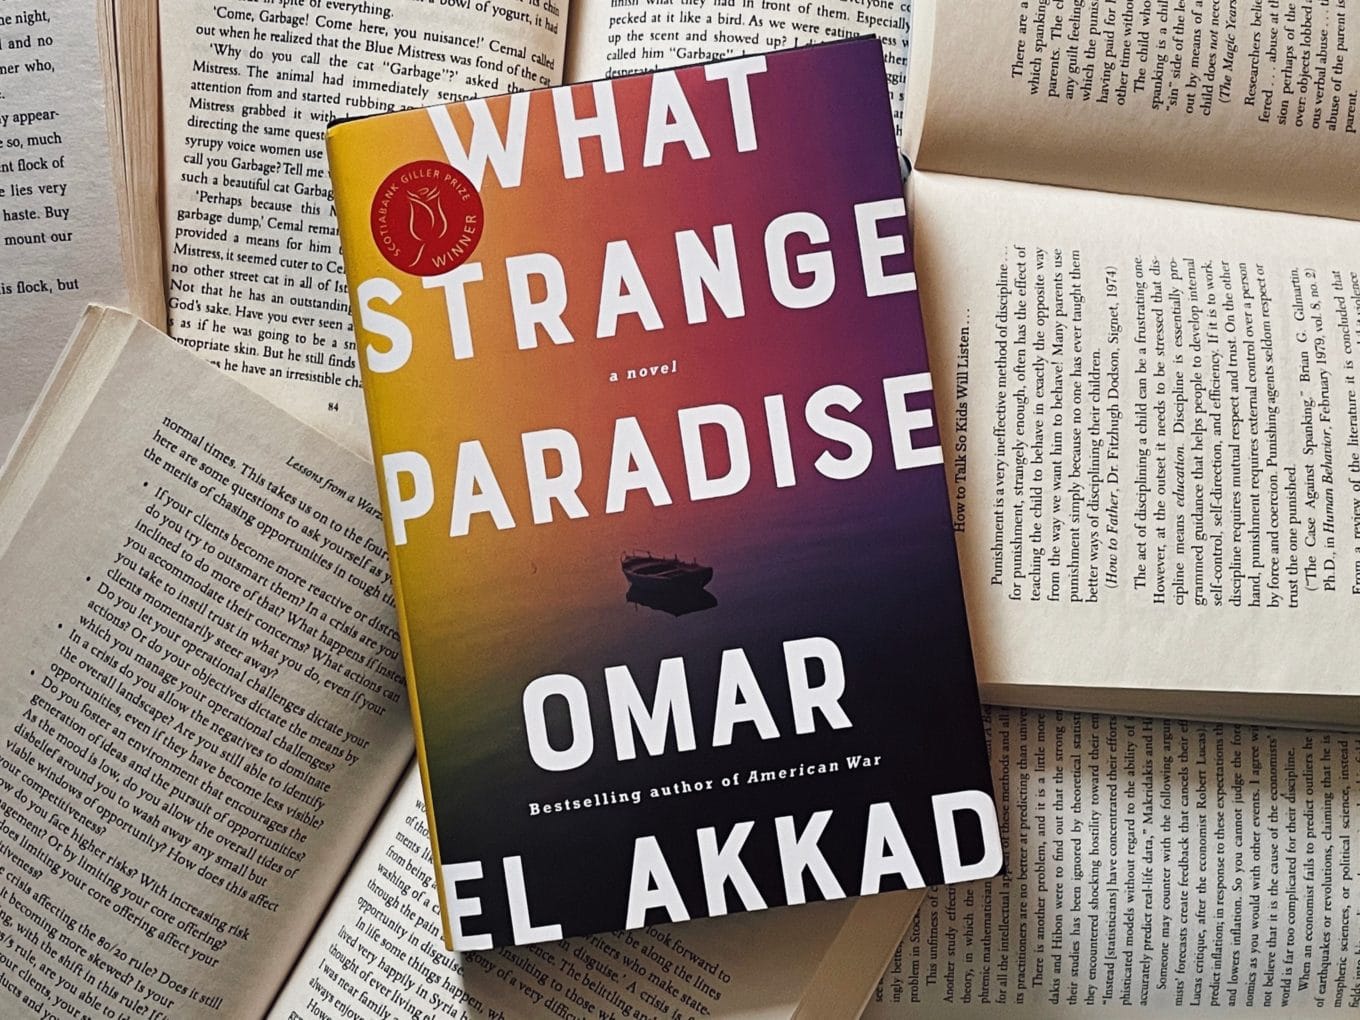 book review what strange paradise